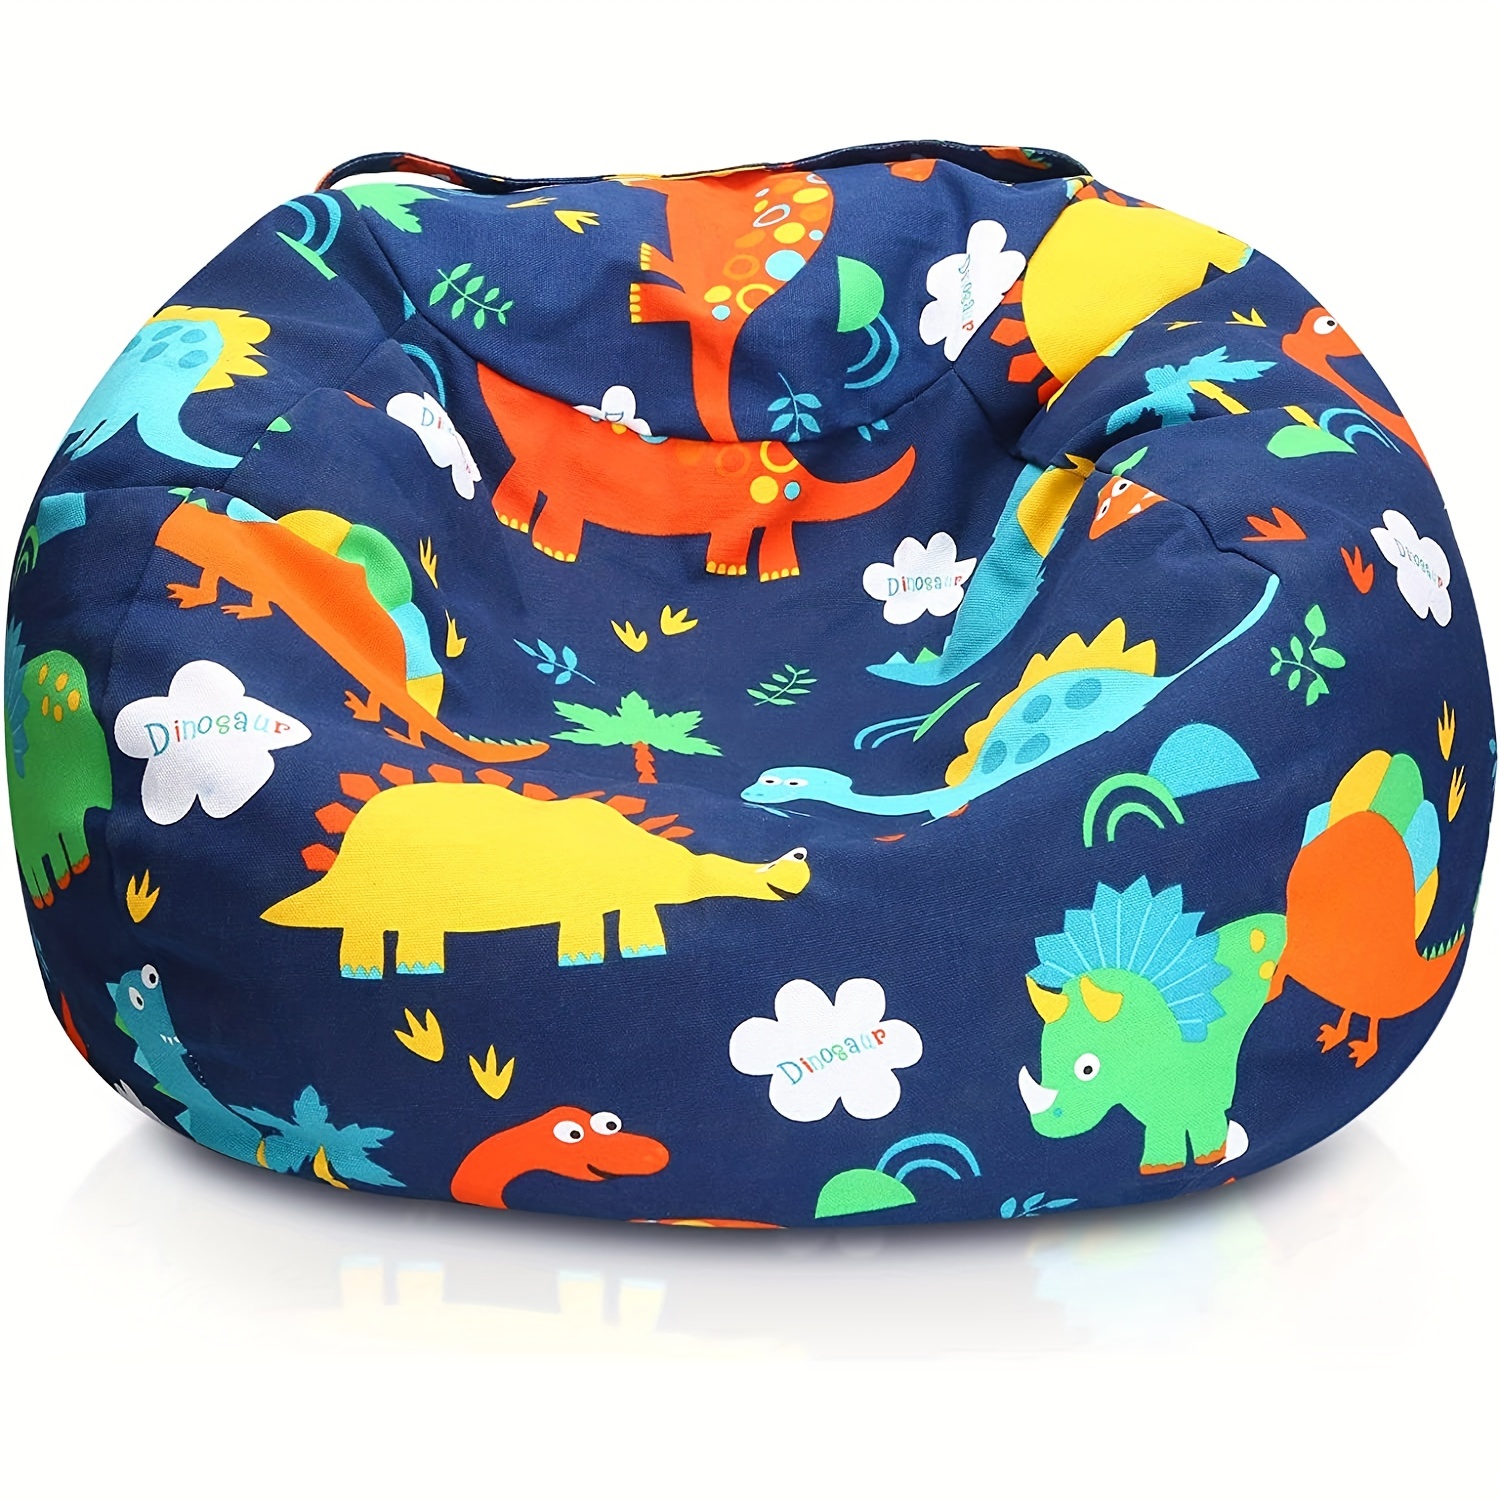 Inflatable Bean Bag Chair for Adults, Kids, and Teens - Washable